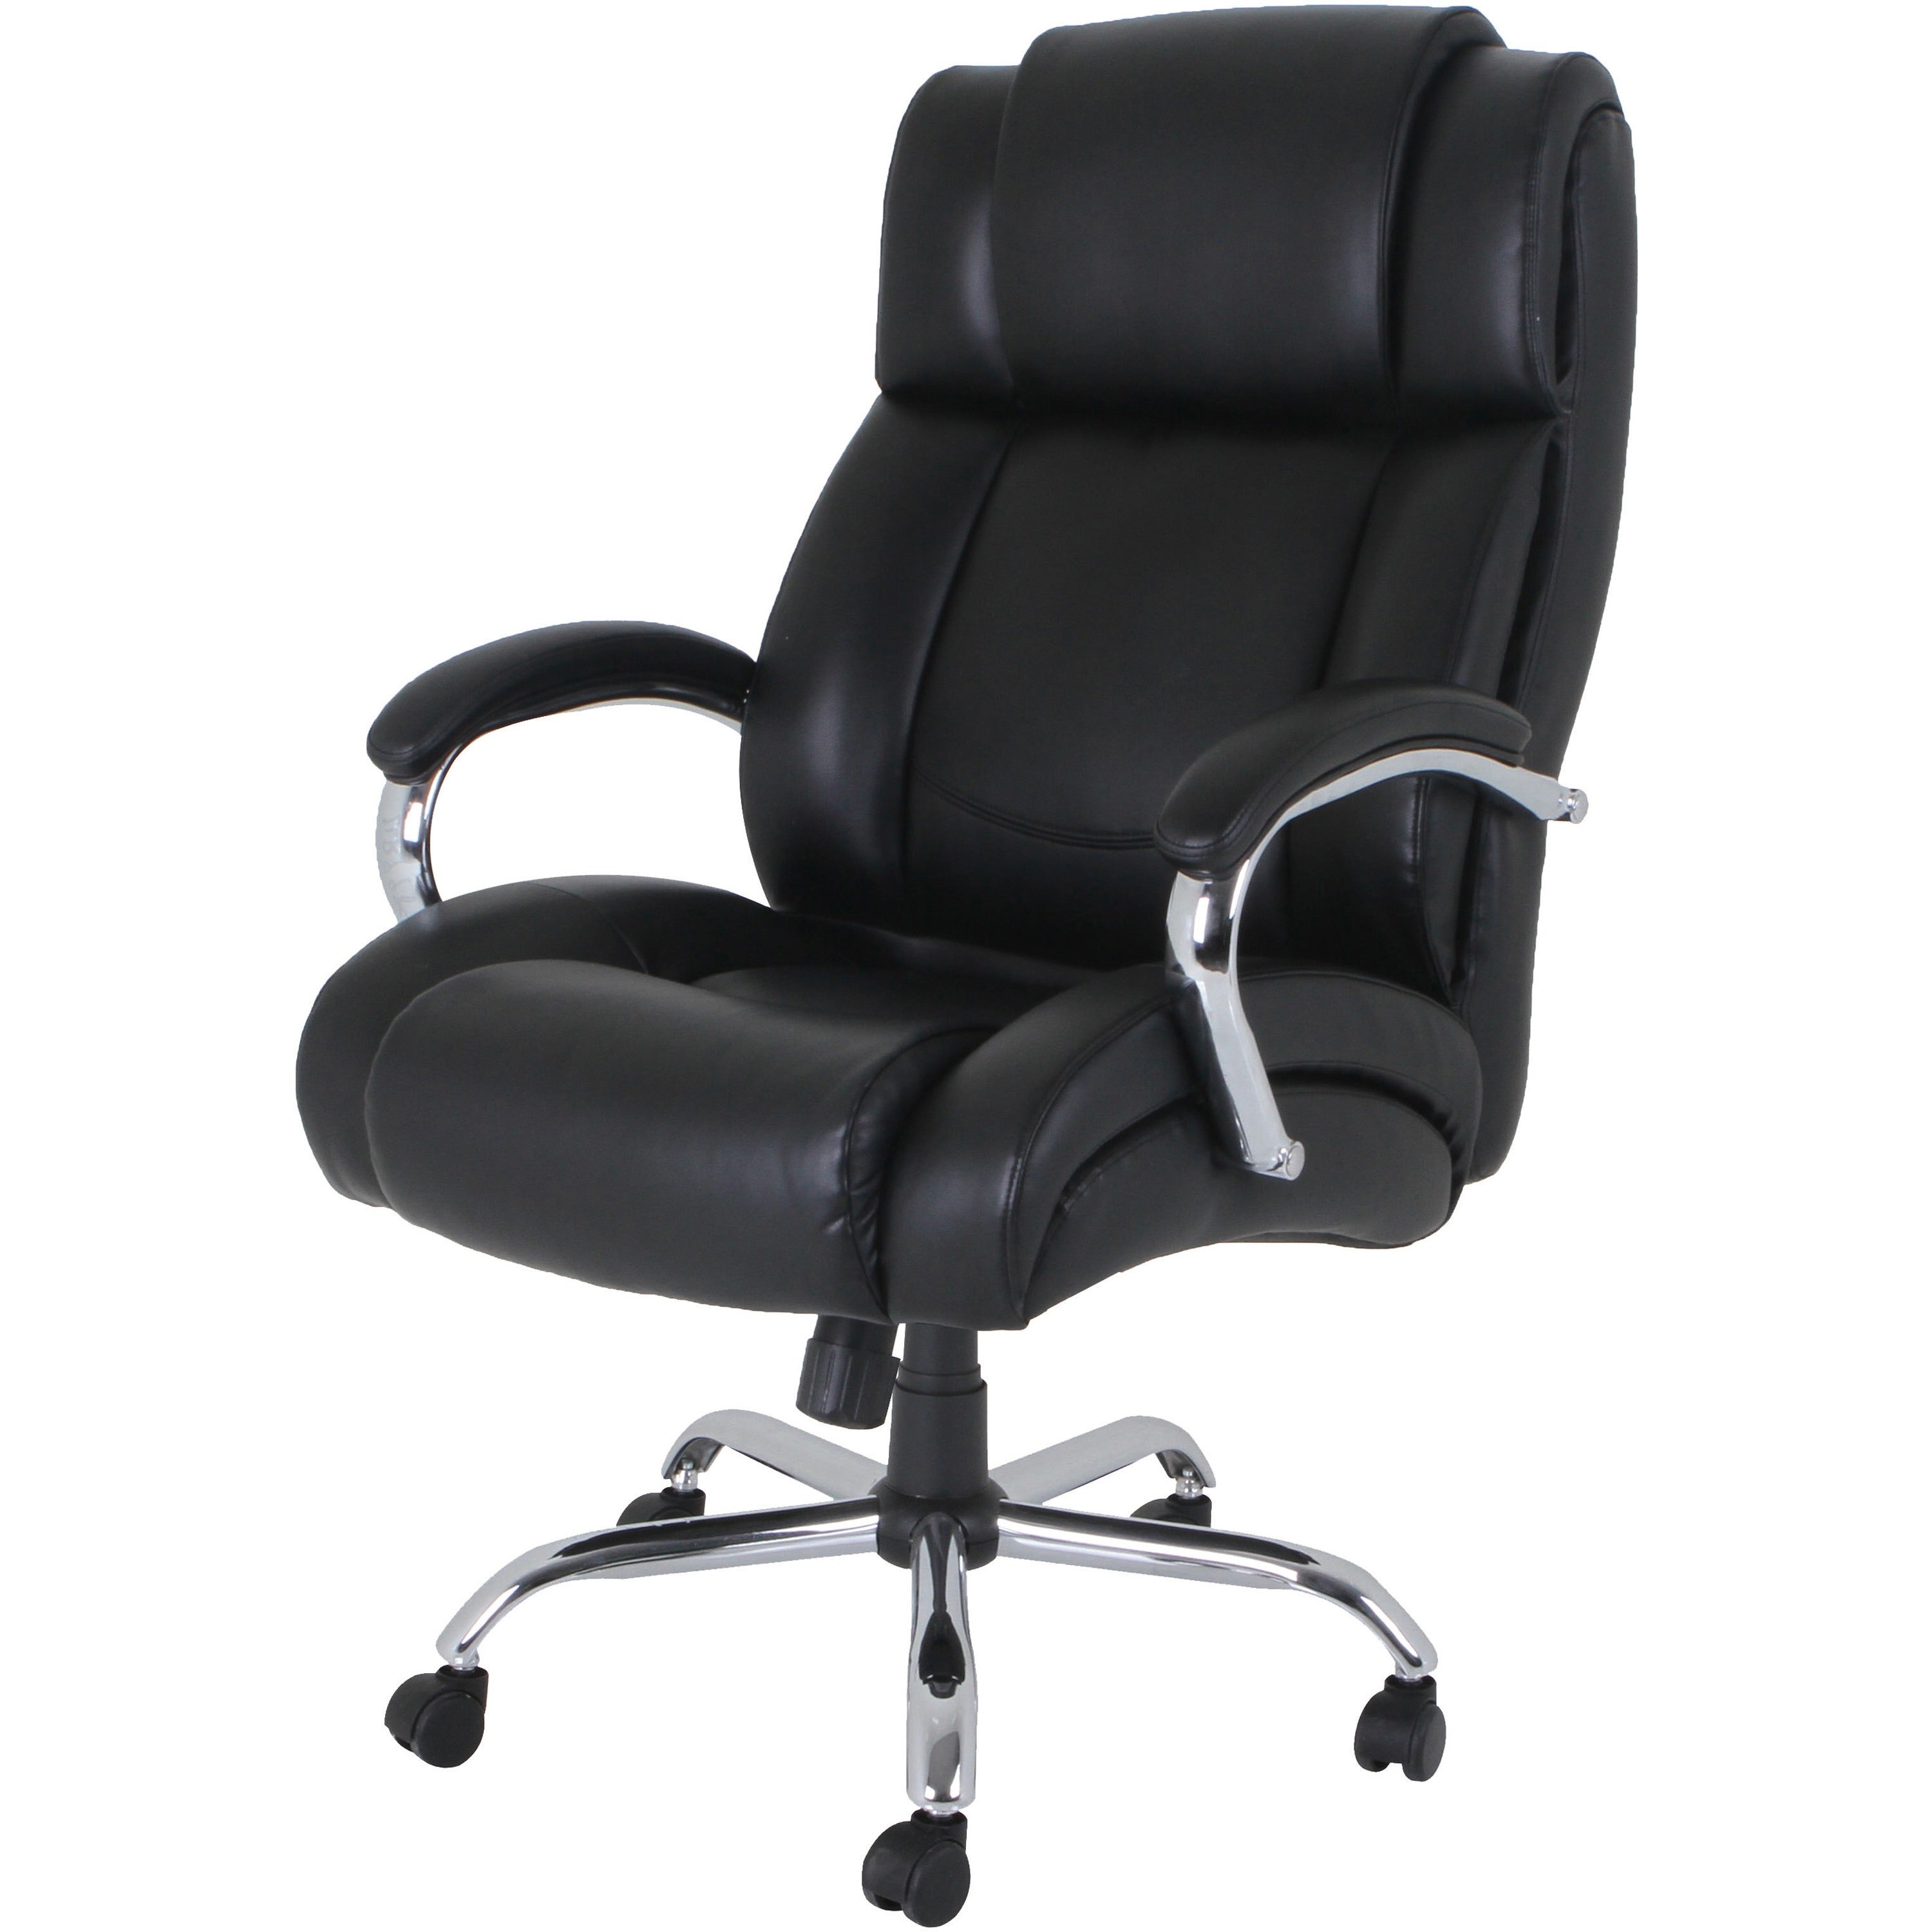 lorell-big-&-tall-chair-with-ultracoil-comfort-black-1-each_llr99845 - 4